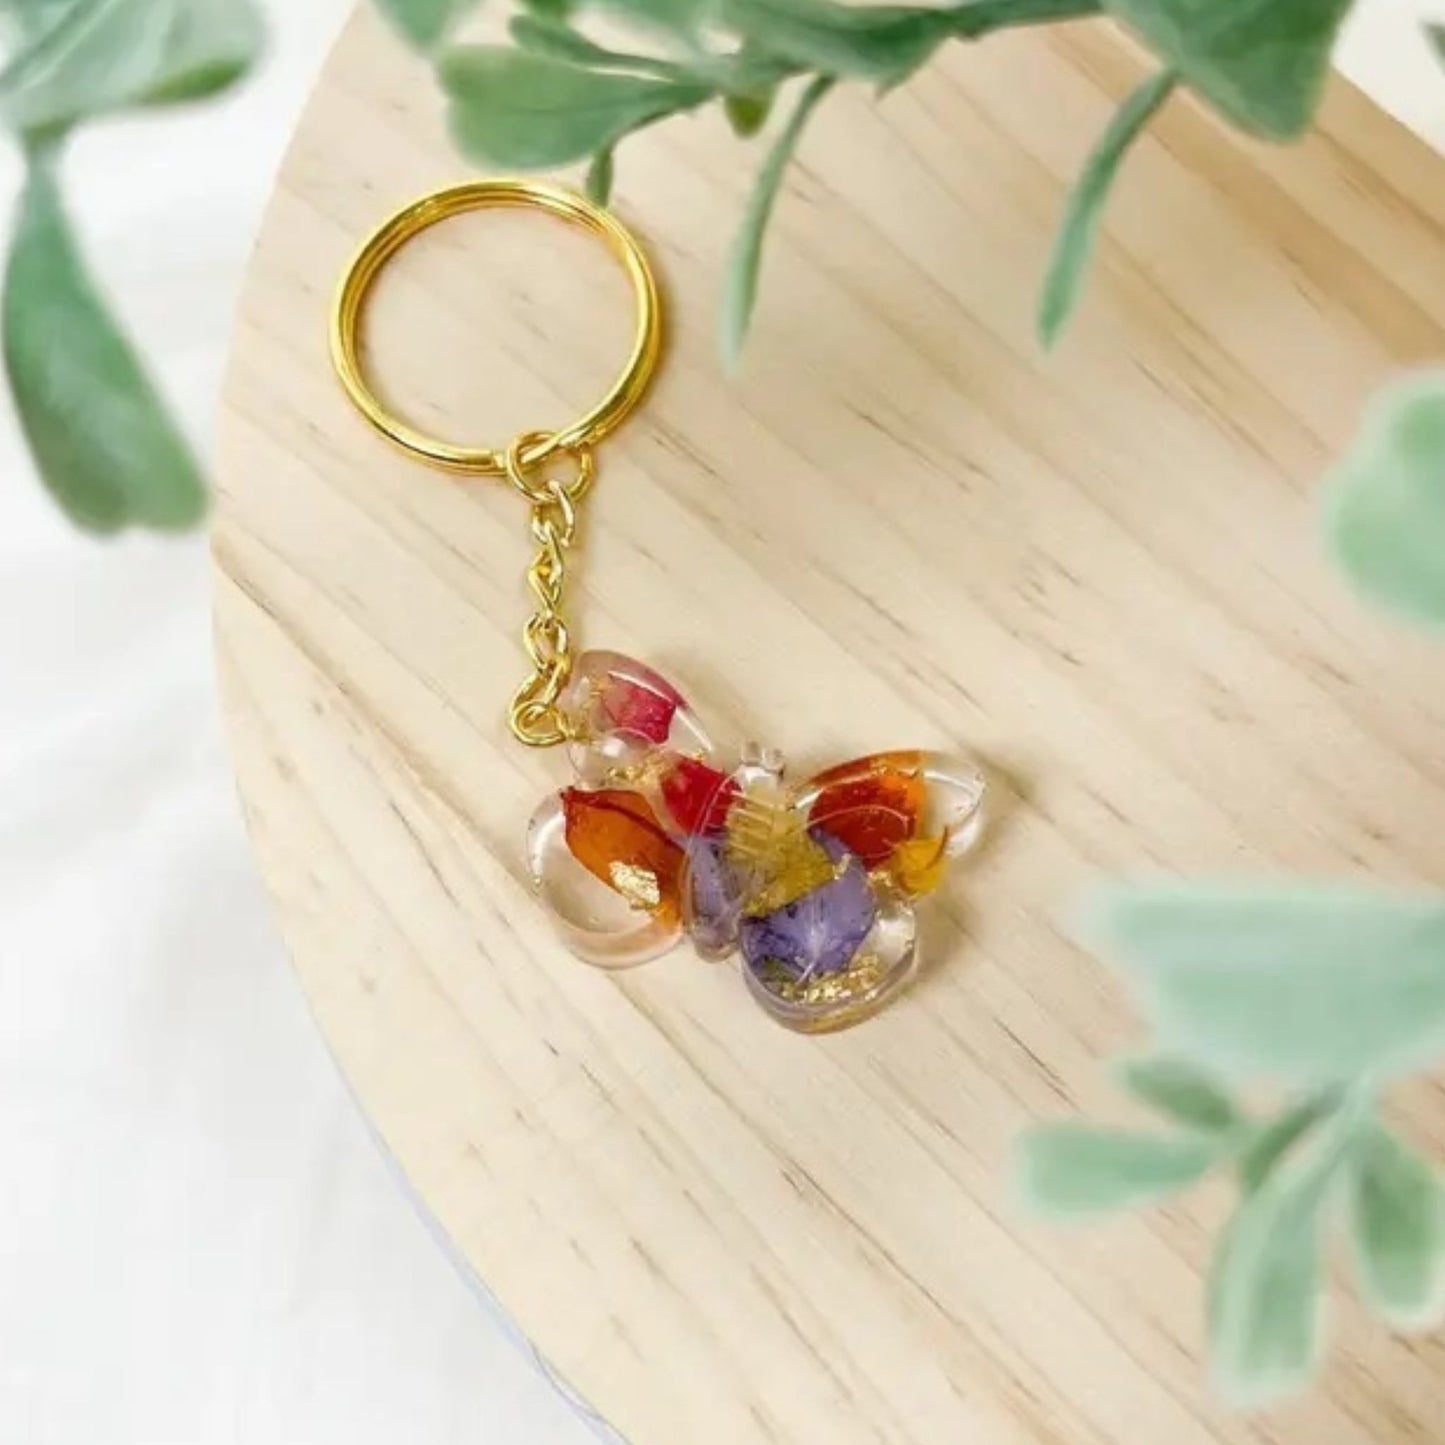 Butterfly Flower Petal Keychain - Made in the USA